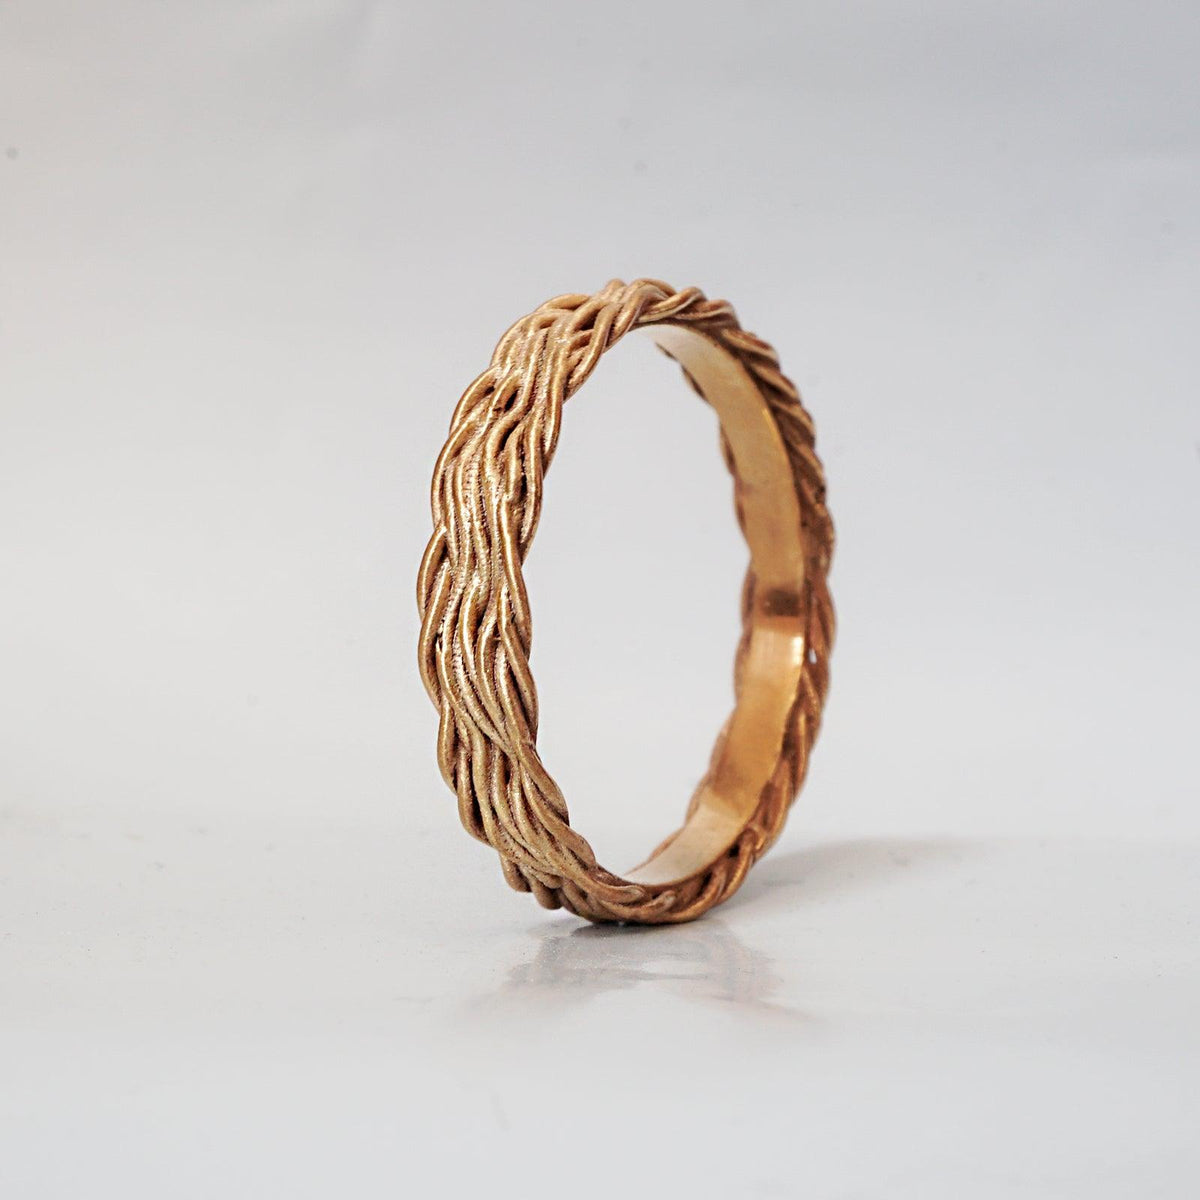 Intertwined Ring Band in 14K Gold, 3mm